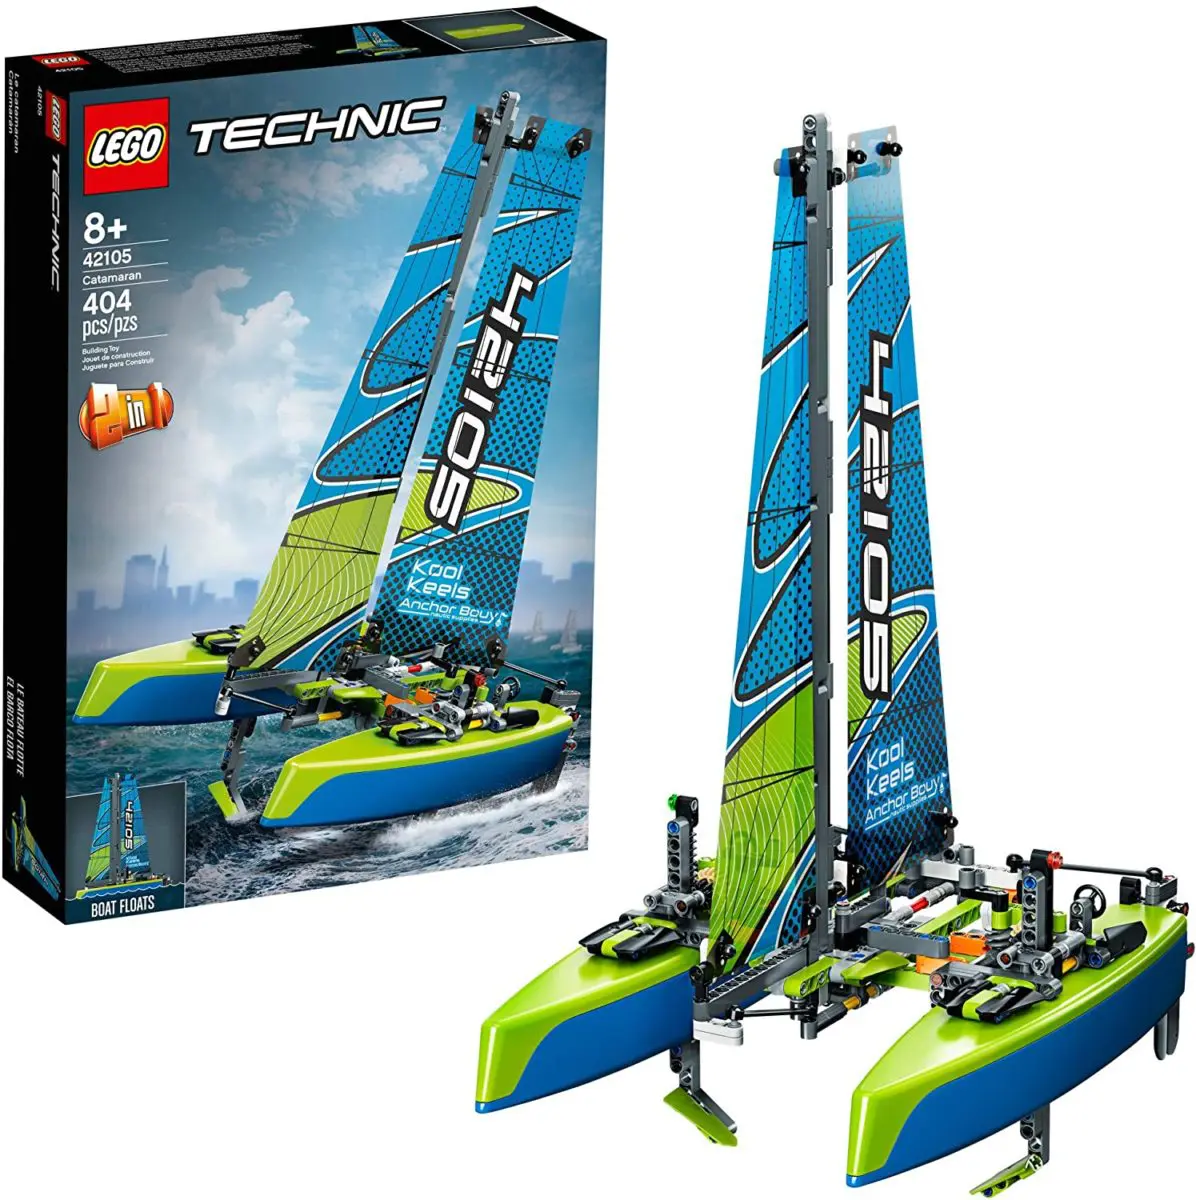 LEGO Technic Catamaran Model Sailboat Building Kit - Top Toys and Gifts for Eight Year Old Boys 1